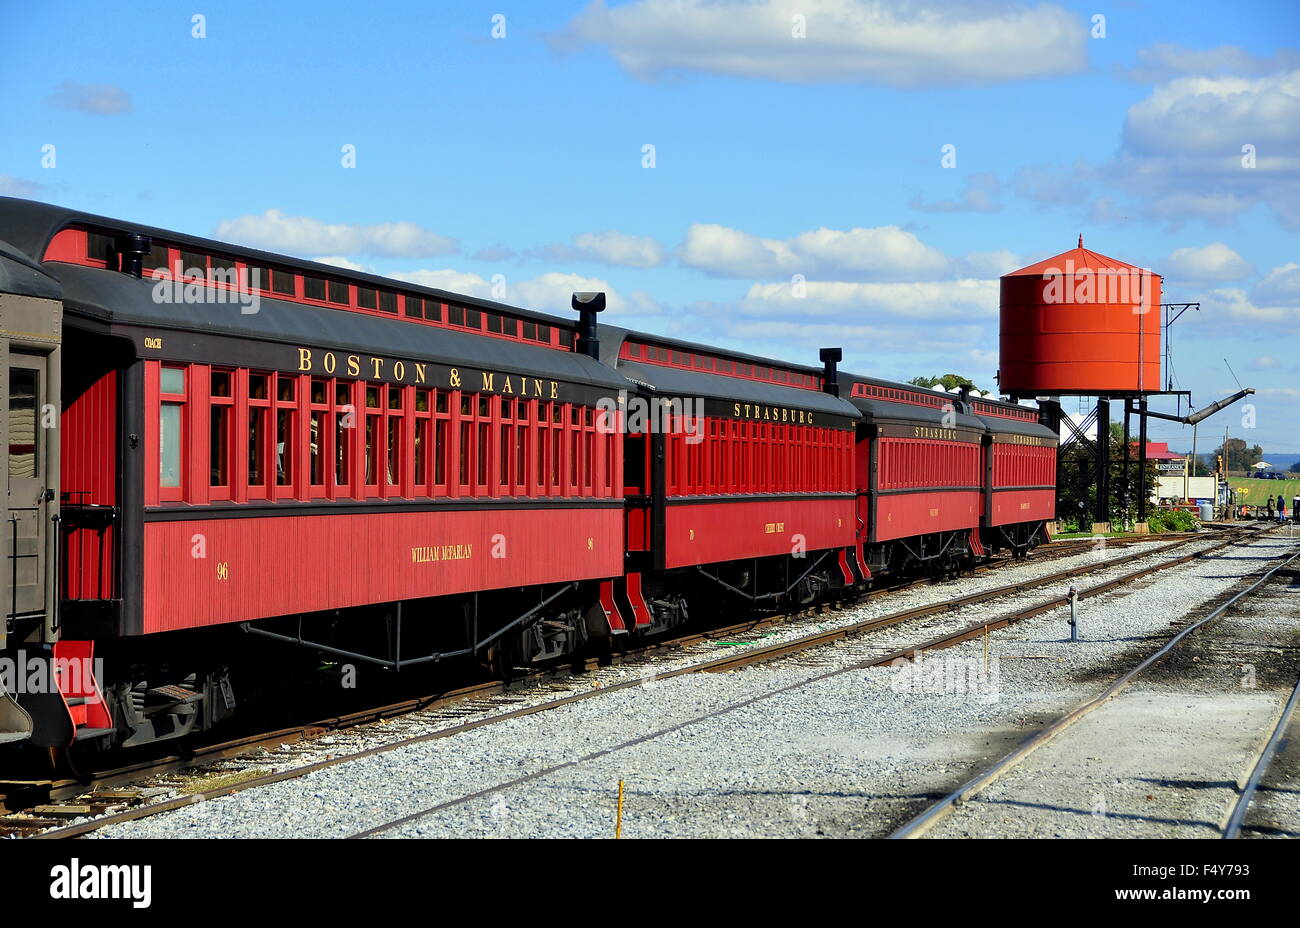 Strasburg, Pennsylvania:  Four vintage wooden passenger cars and steam engine water tower at the Strasburg Railroad Stock Photo